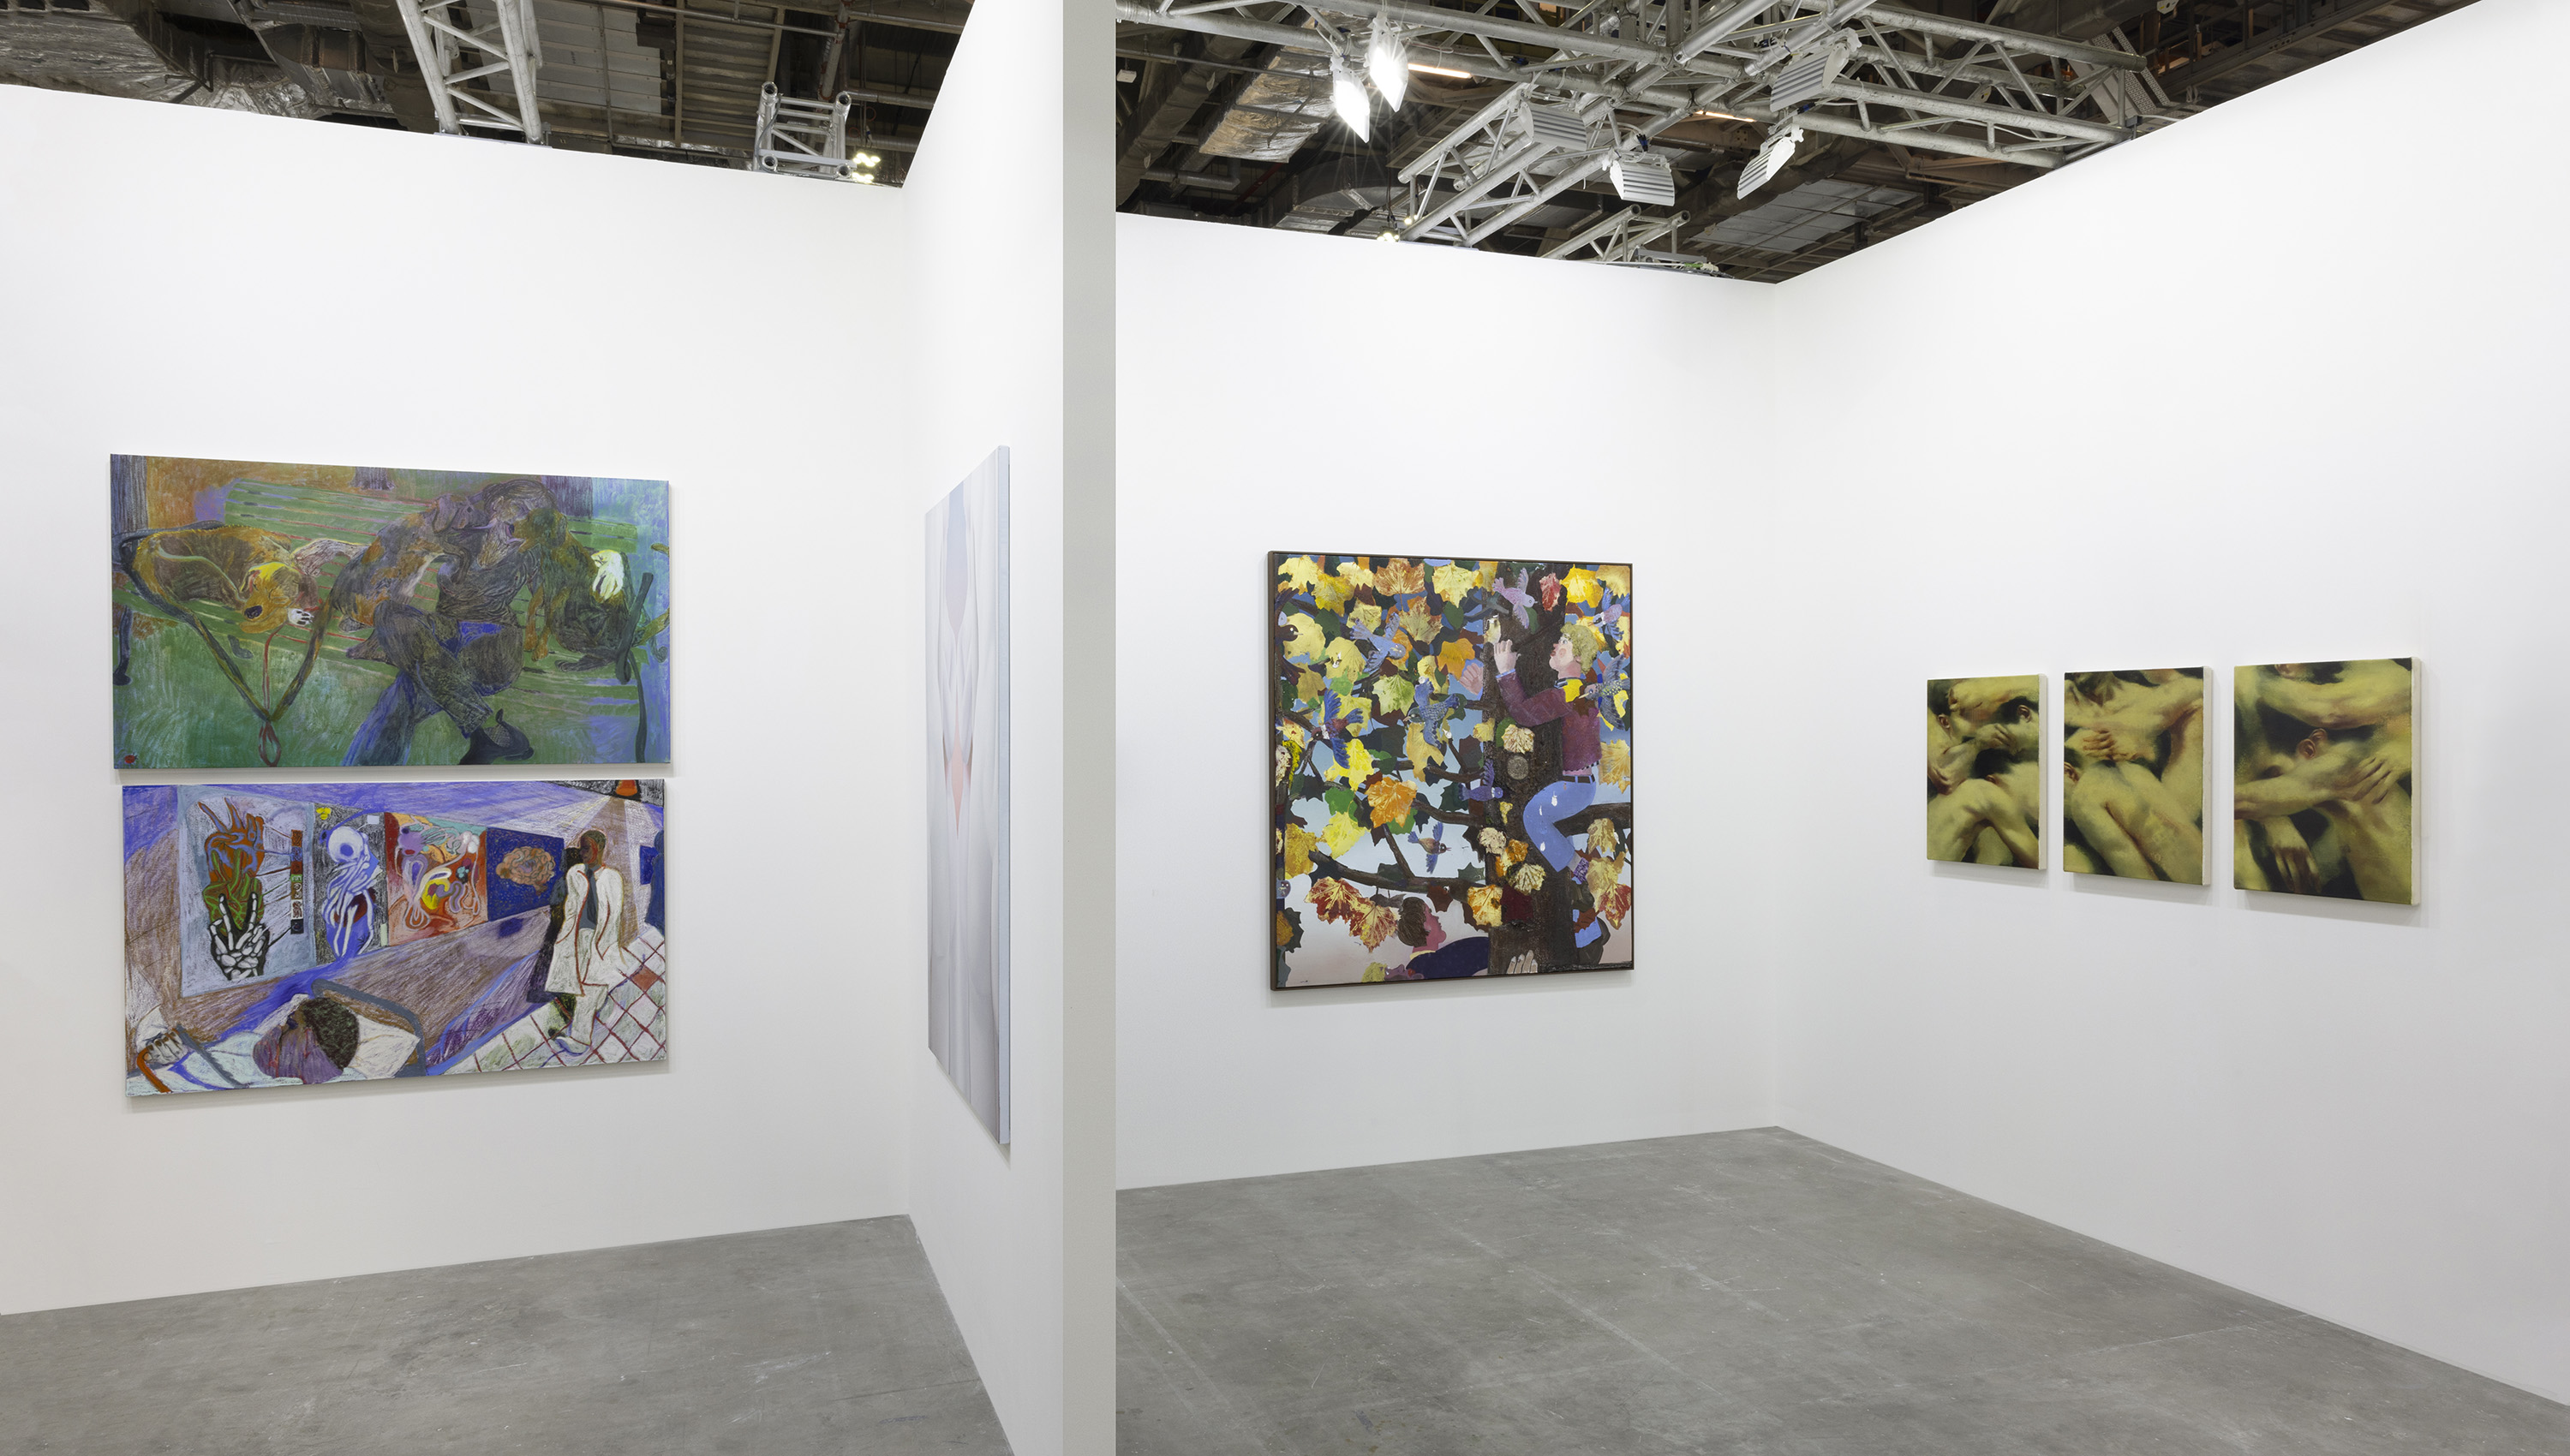 Gallery Vacancy at ART SG, 2024. Installation view of Henry Curchod, Vivian Greven, Pieter Jennes, and Preslav Kostov (left to right).